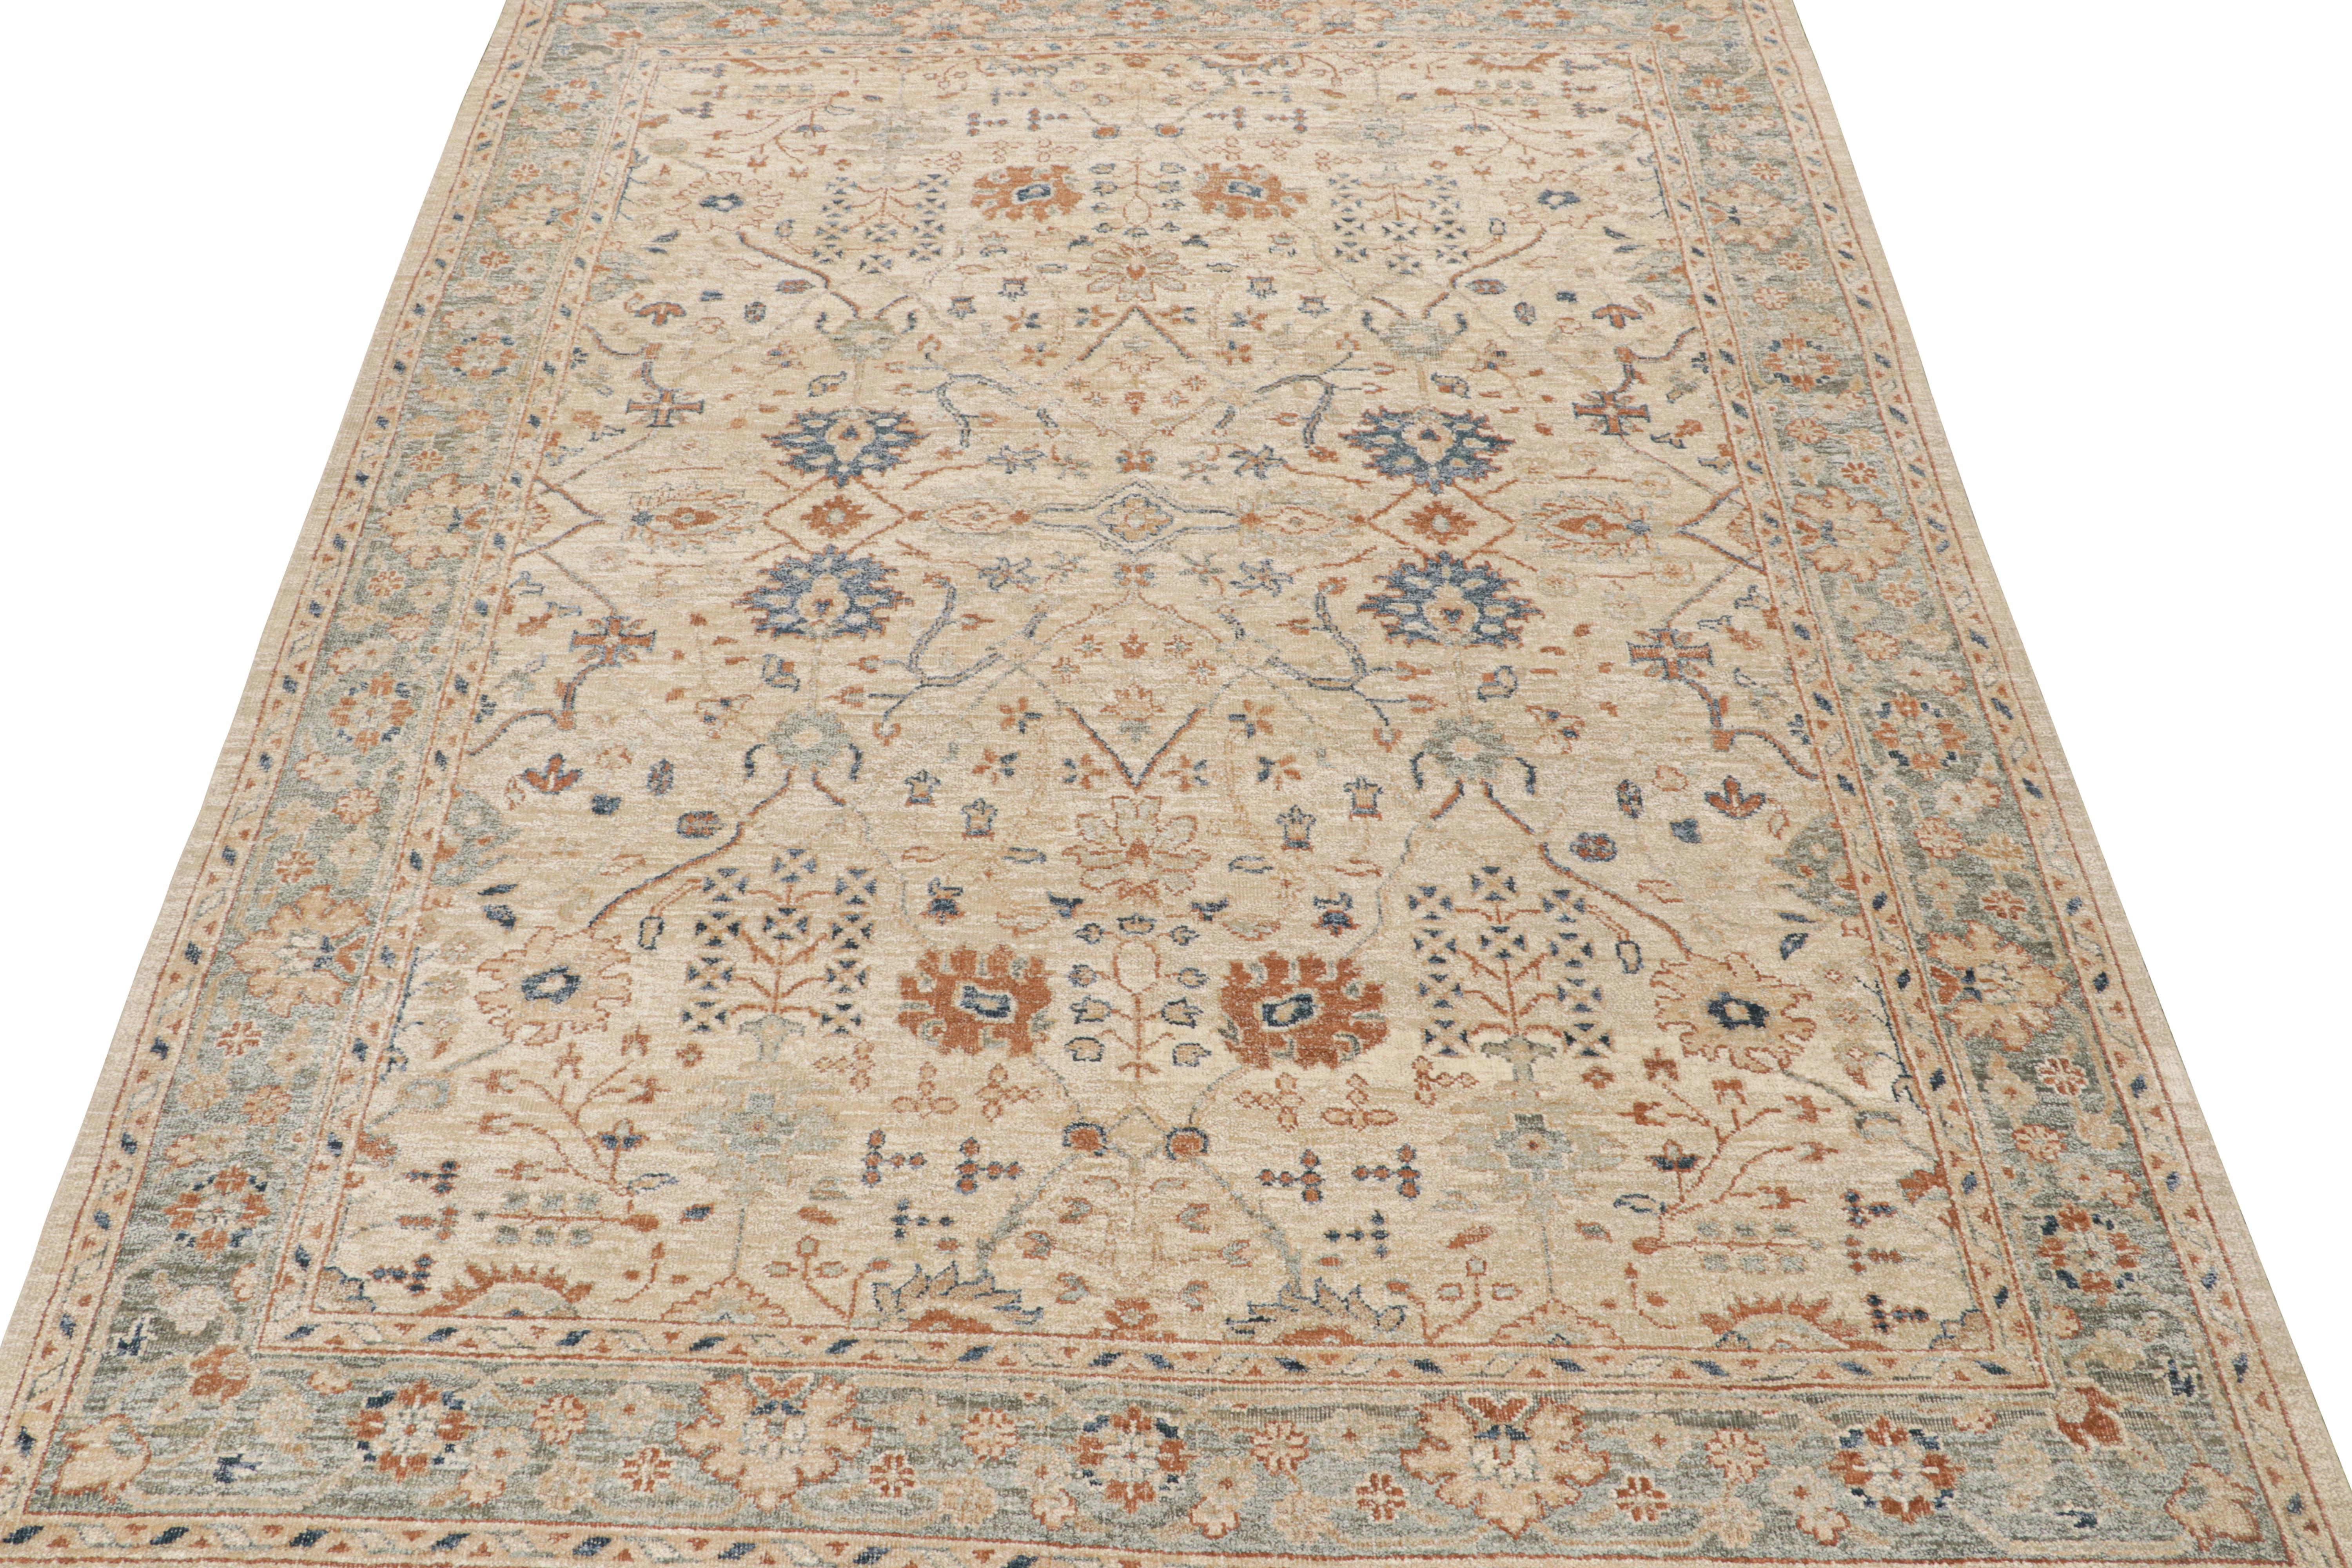 Indian Rug & Kilim’s Oushak Style Rug in Cream, Blue, Beige-Brown Geometric Patterns For Sale